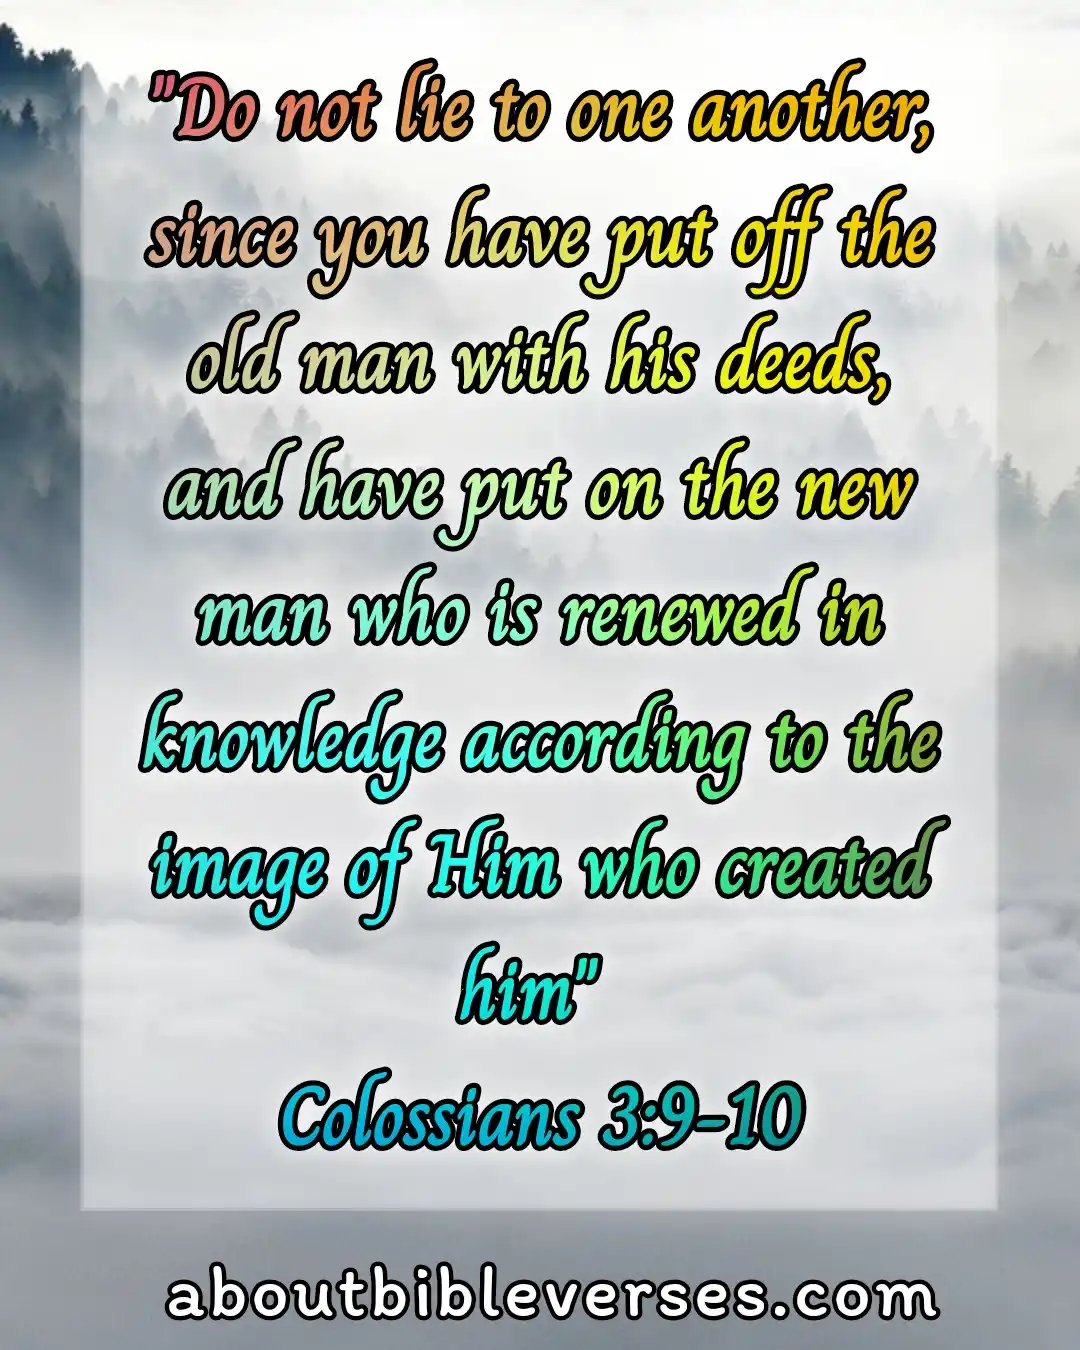 today bible verse (Colossians 3:9-10)